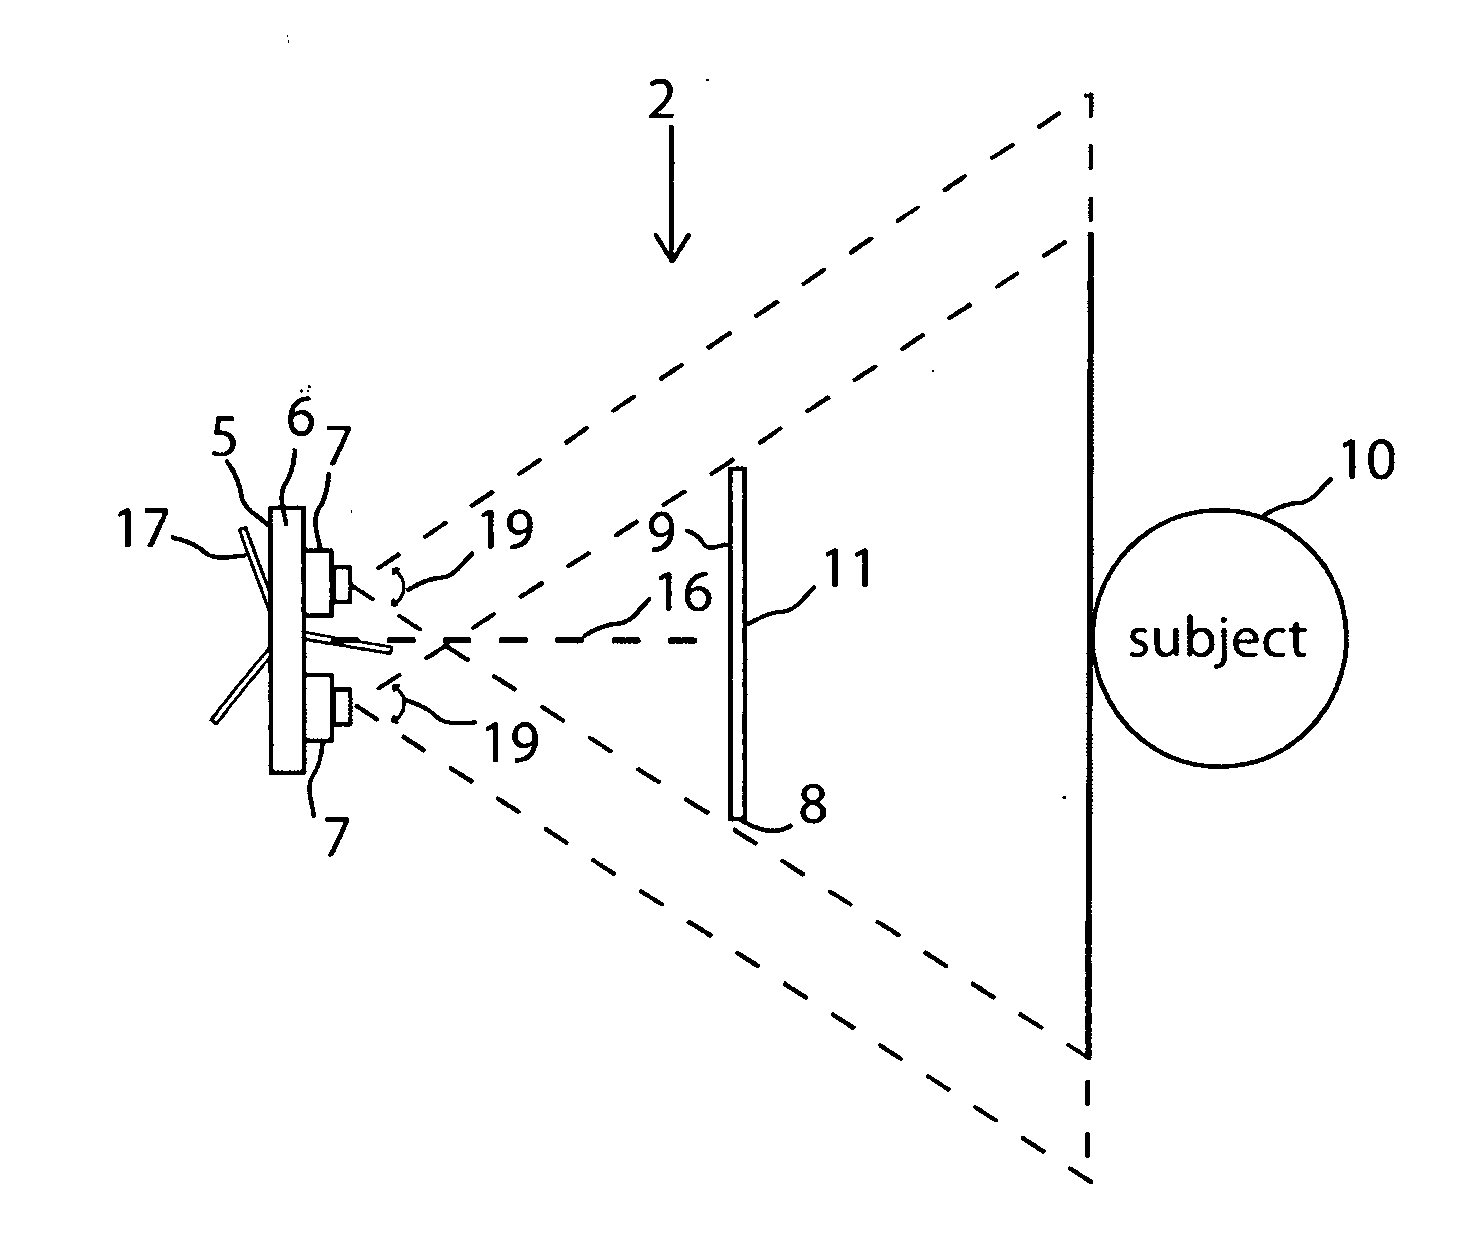 System and/or method for automated stereoscopic alignment of images